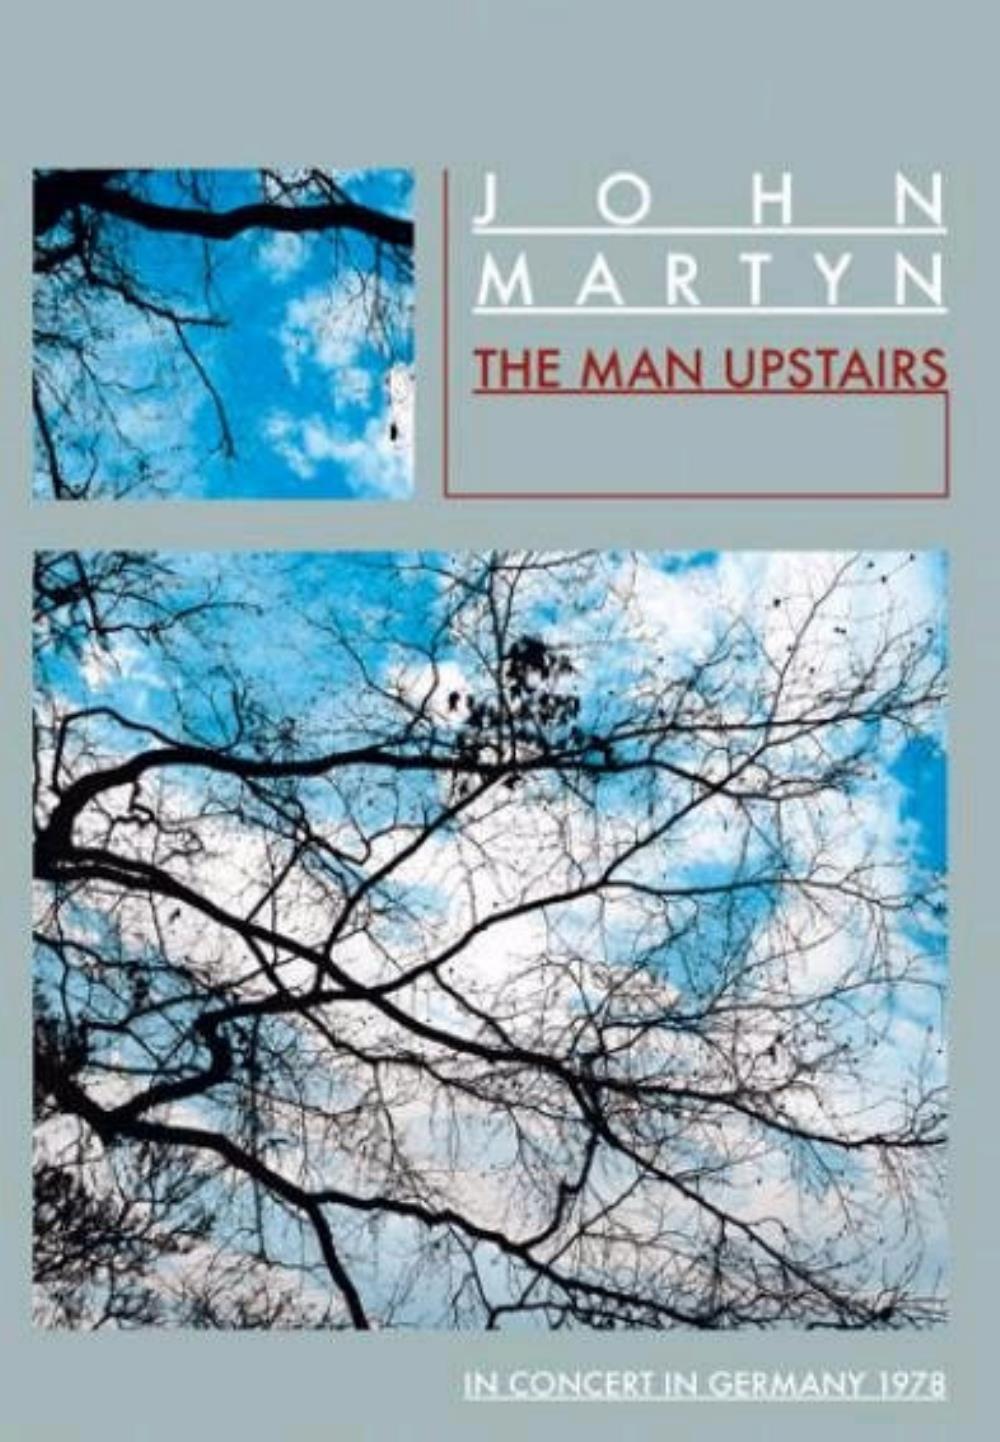 John Martyn The Man Upstairs - In Concert in Germany 1978 album cover